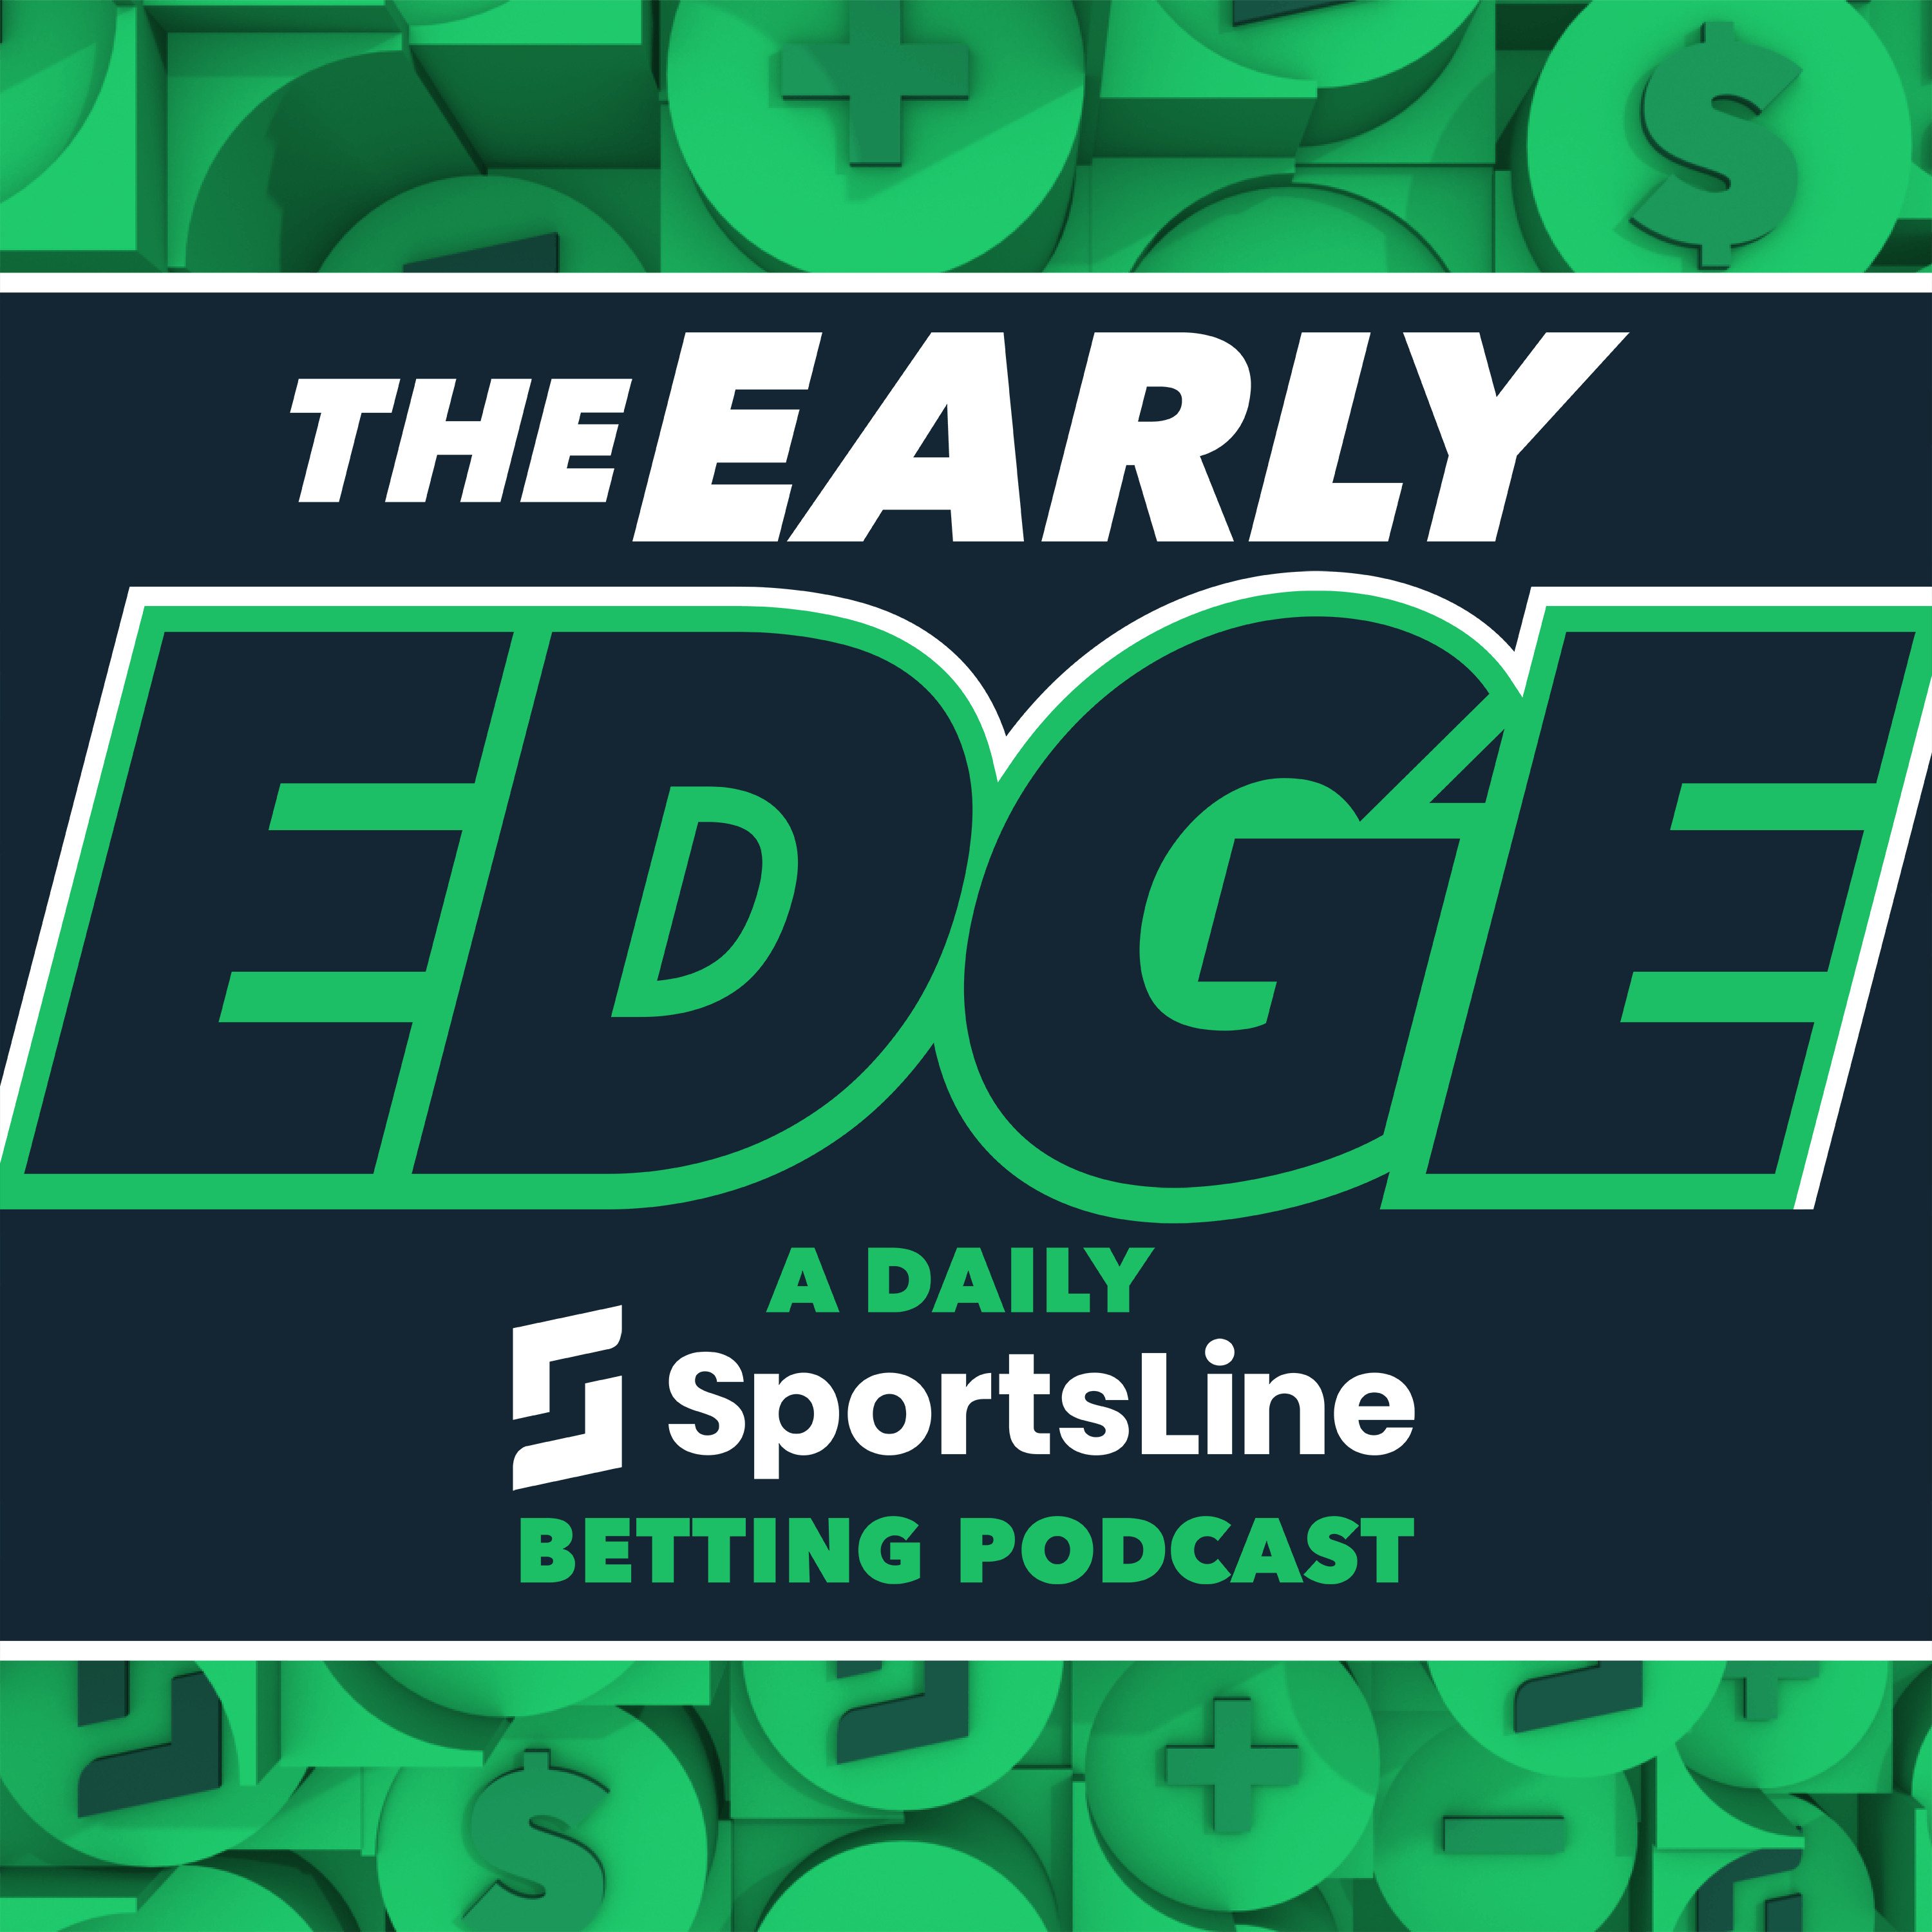 Monday's BEST BETS: NBA Picks & Props + College Basketball Picks! | The Early Edge